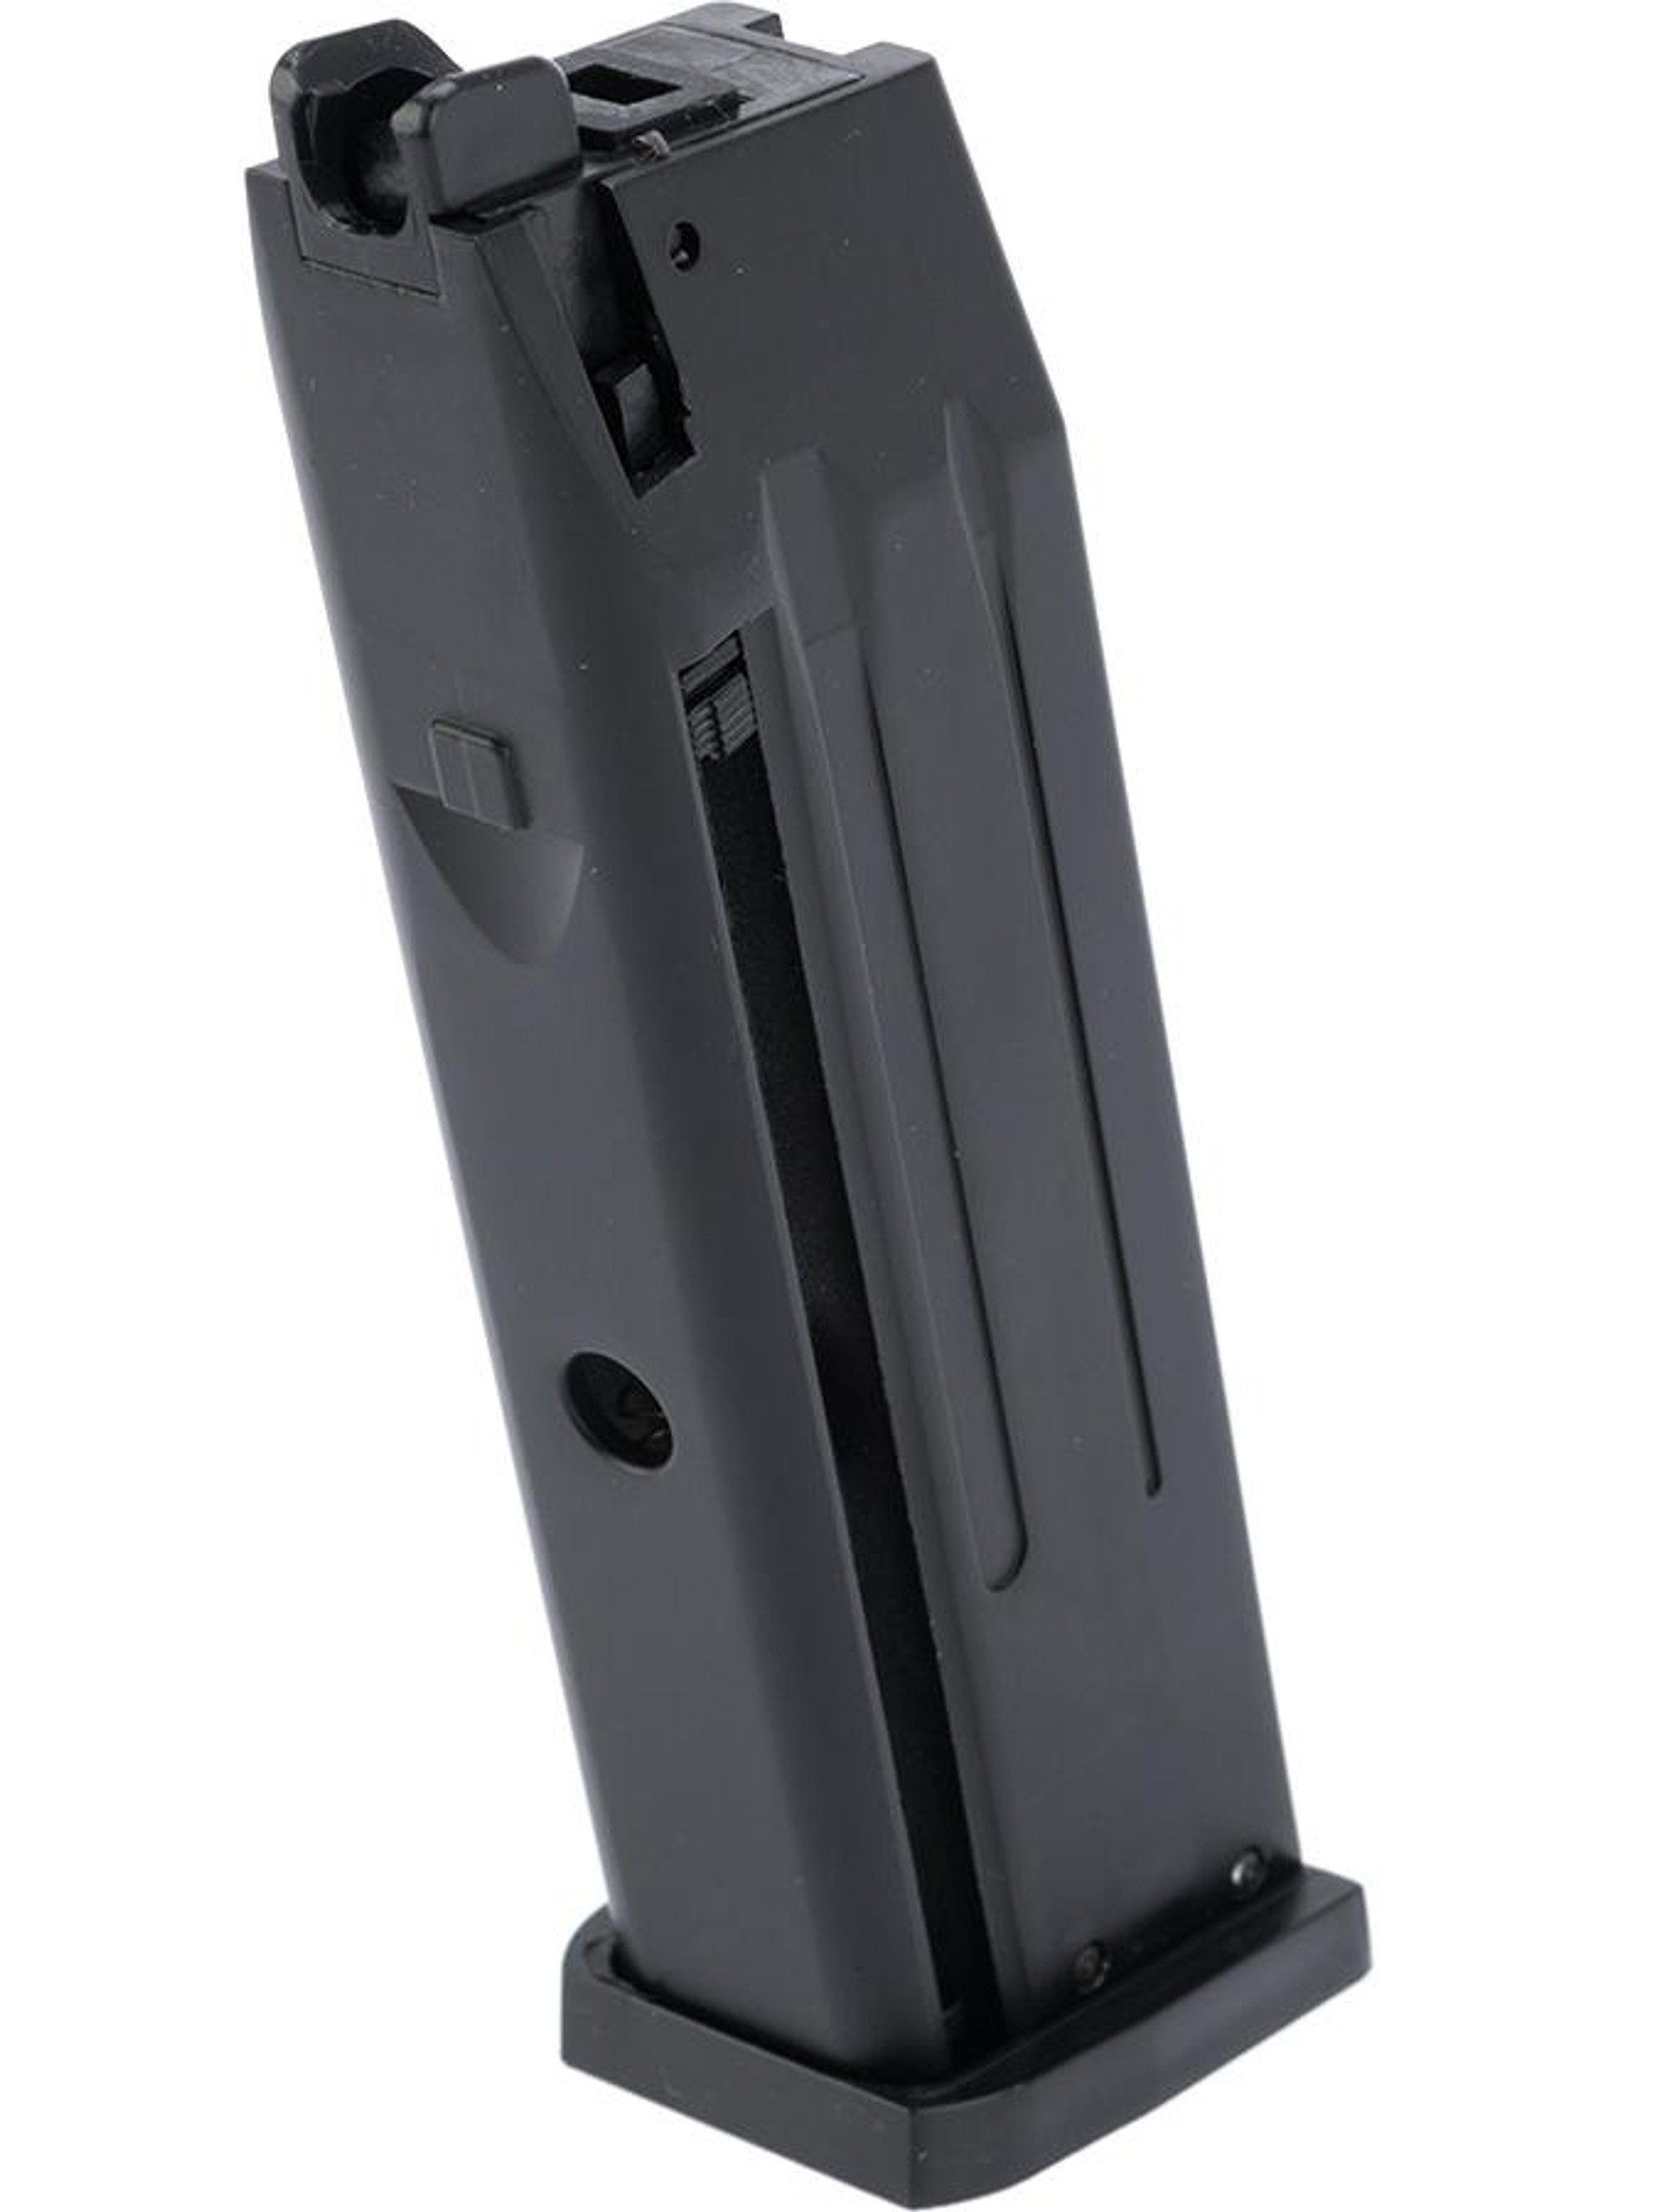 HFC Spare Magazine for HFC M166 Airsoft Gas Blowback Series